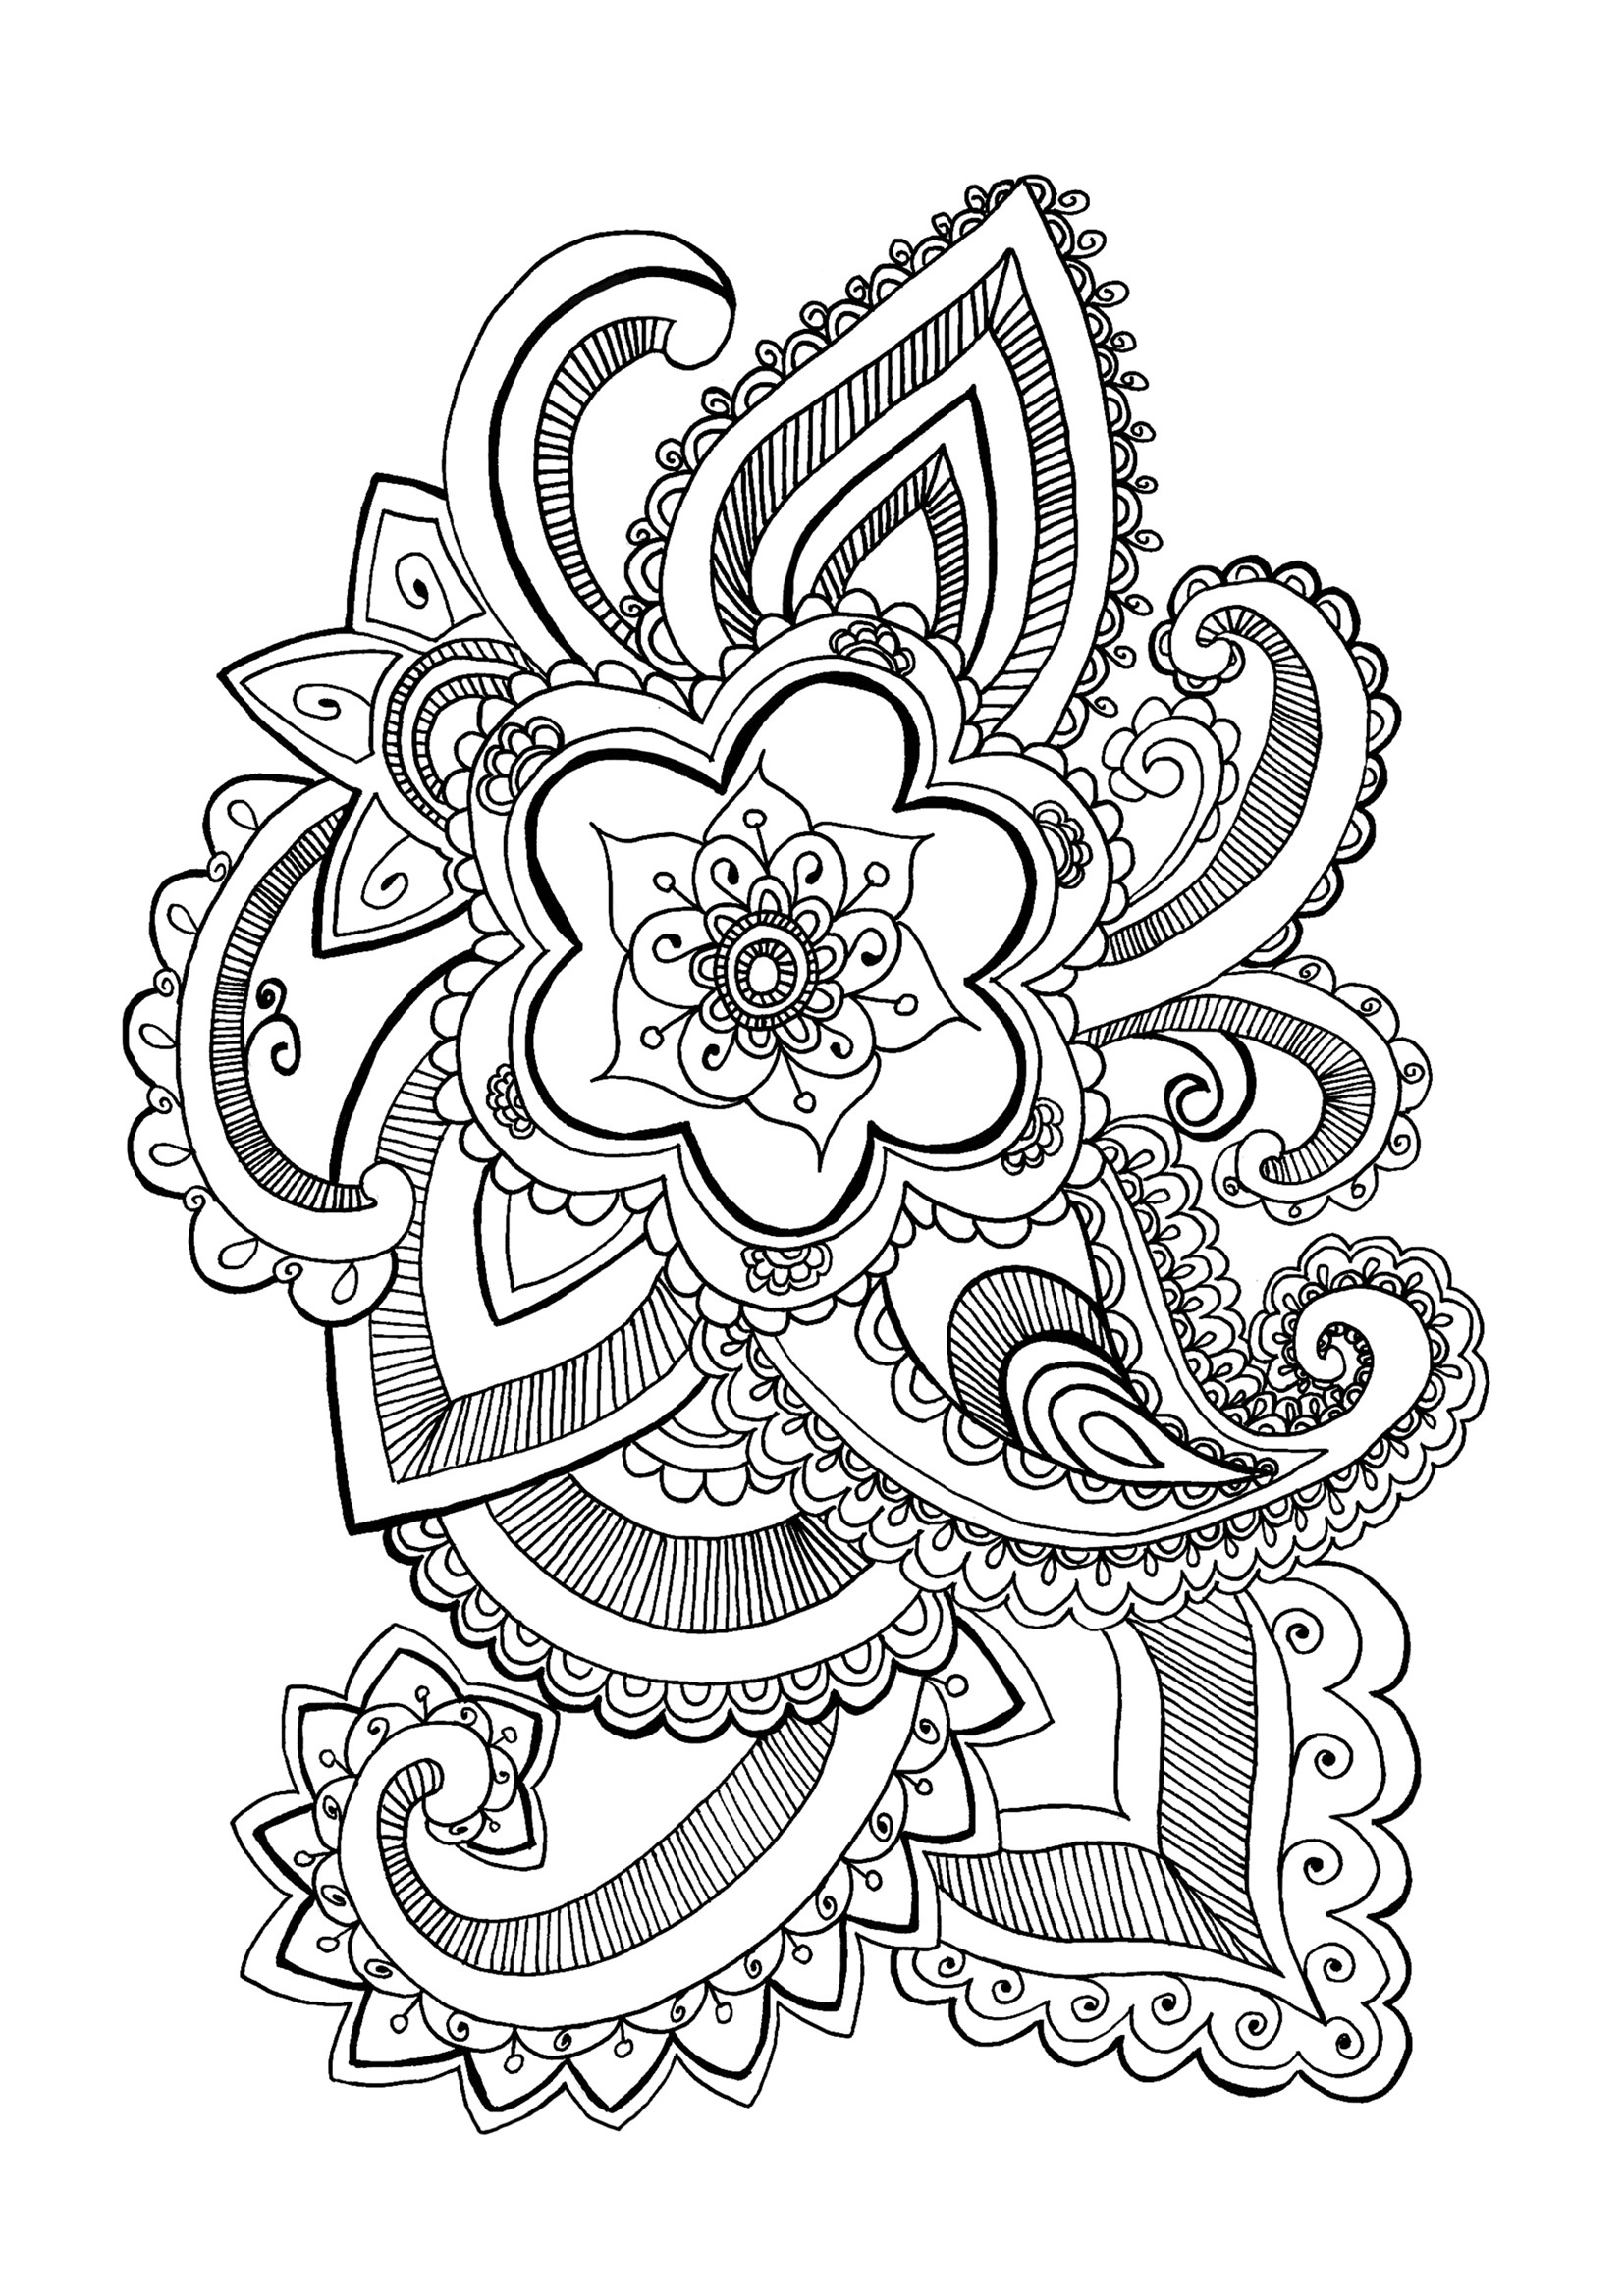 Coloring Books For Adults
 Flower Mandala Coloring Pages Best Coloring Pages For Kids